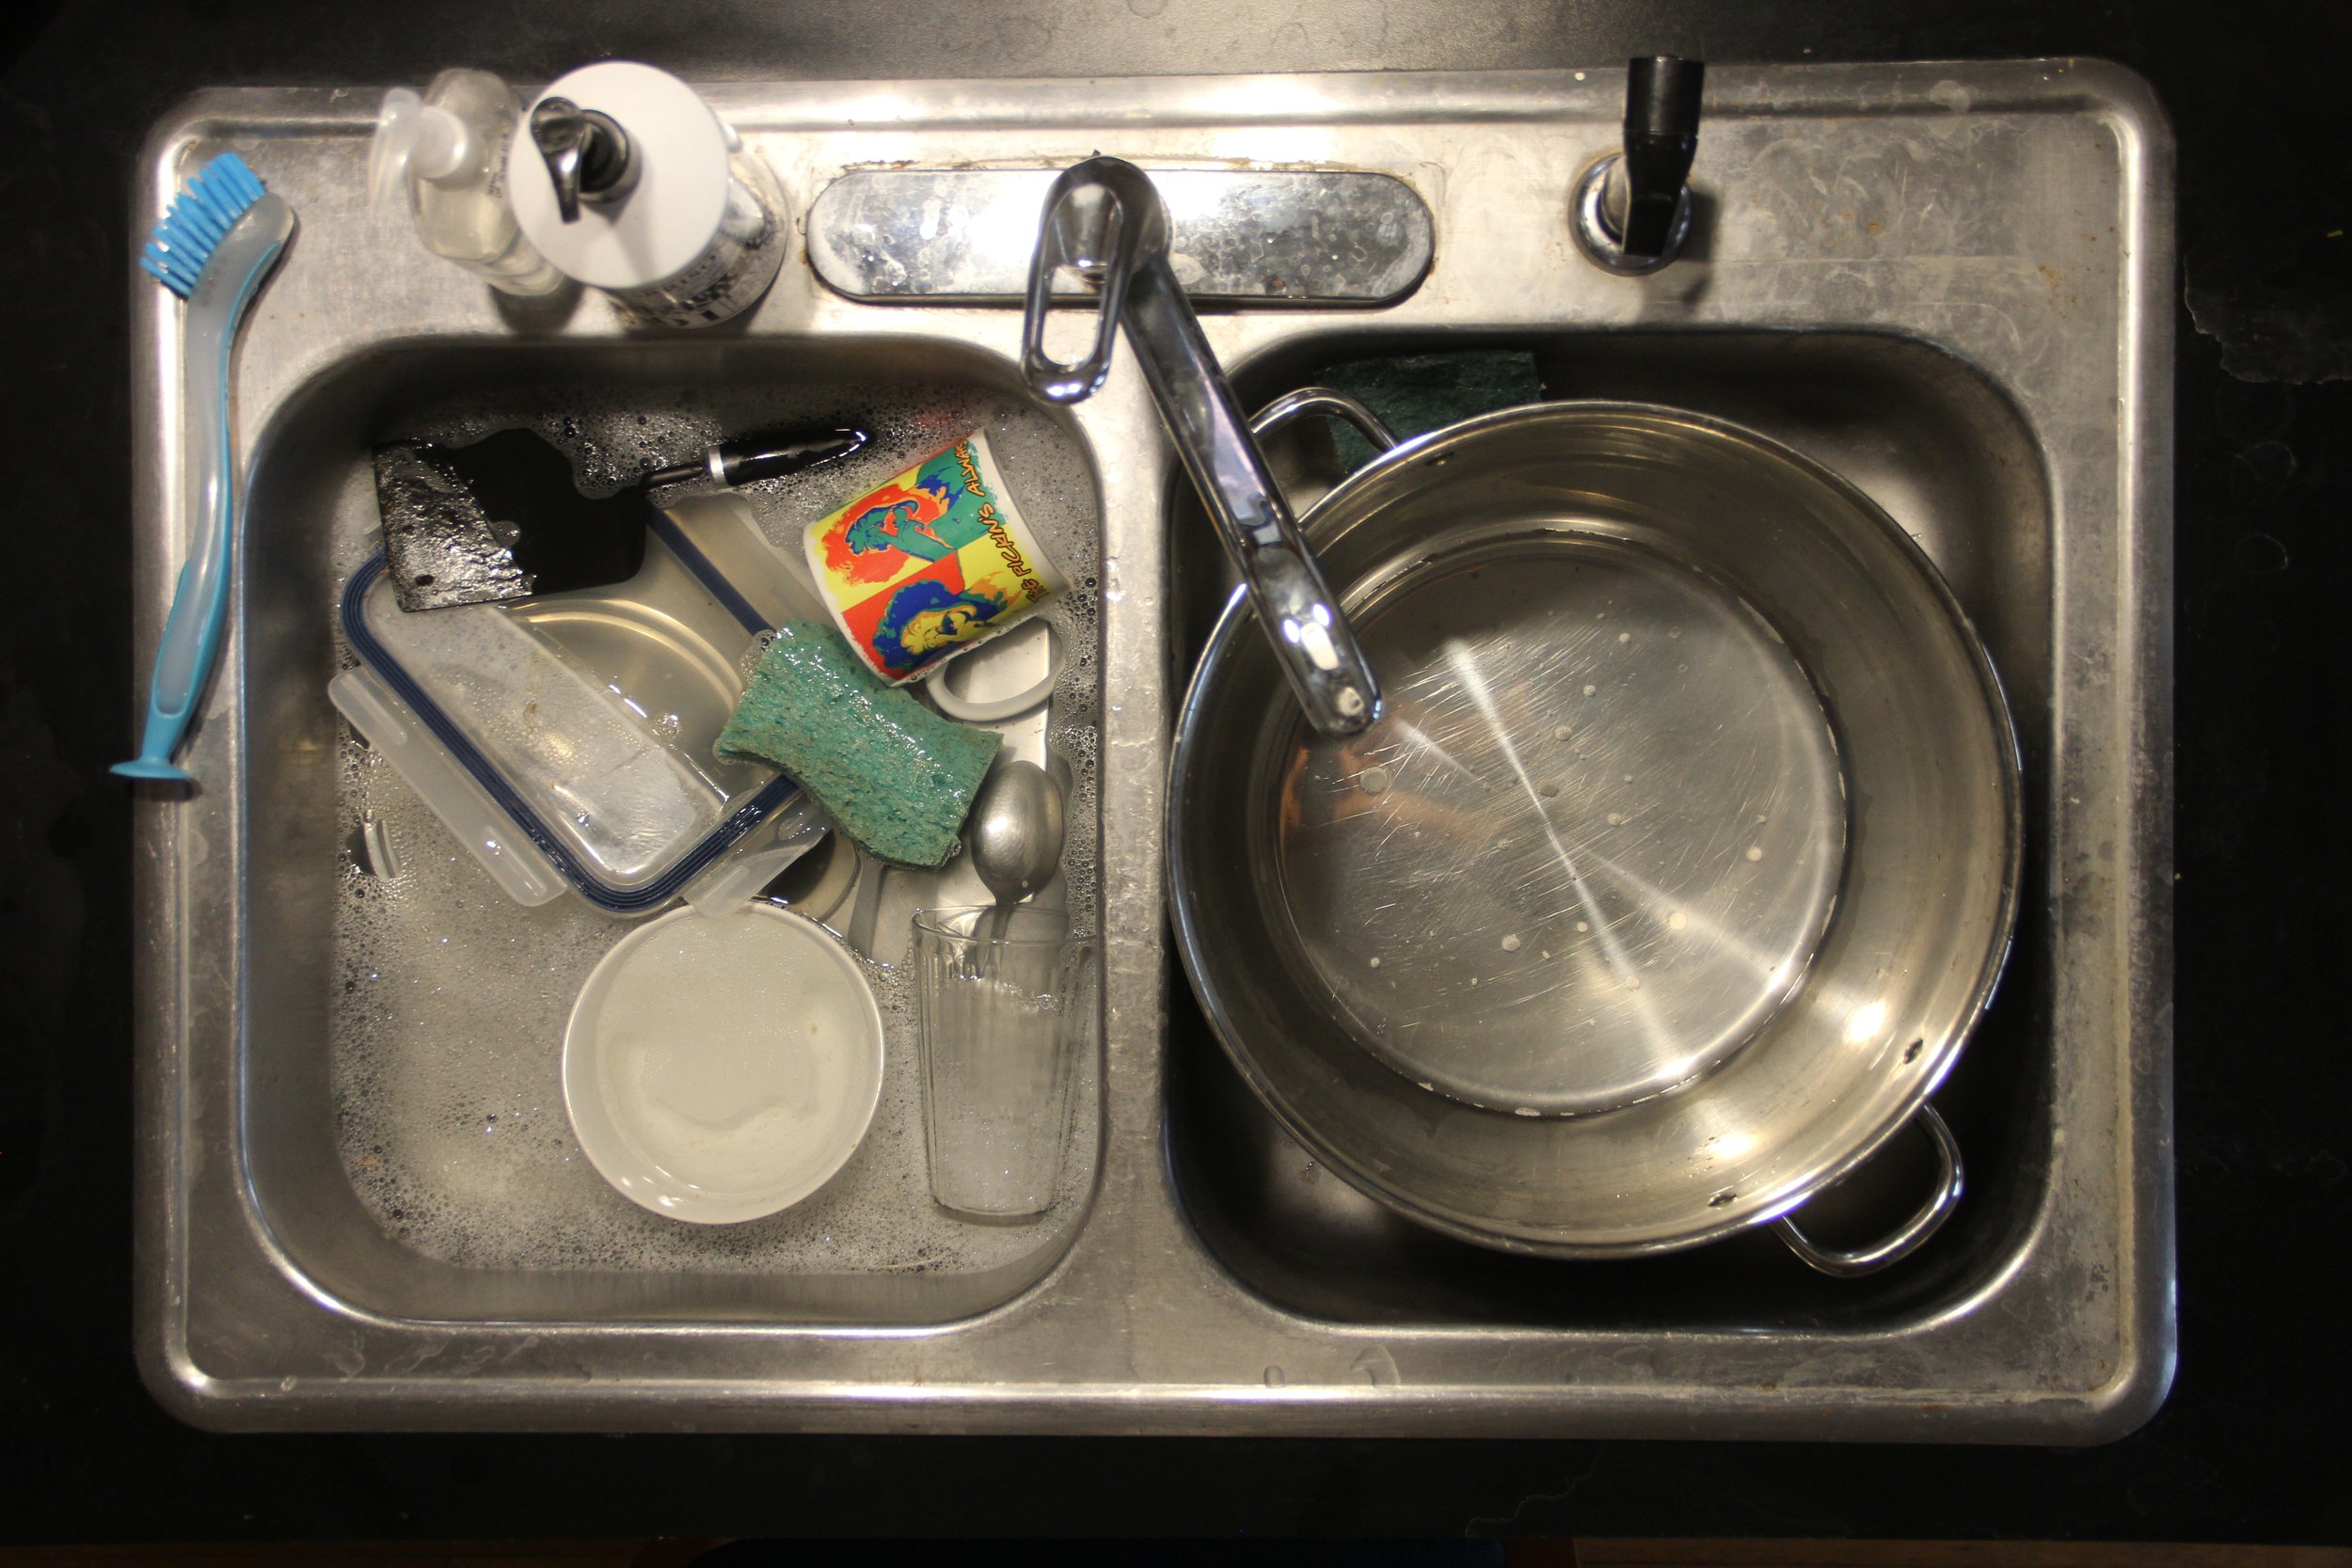 Collecting dishwater for paper-making